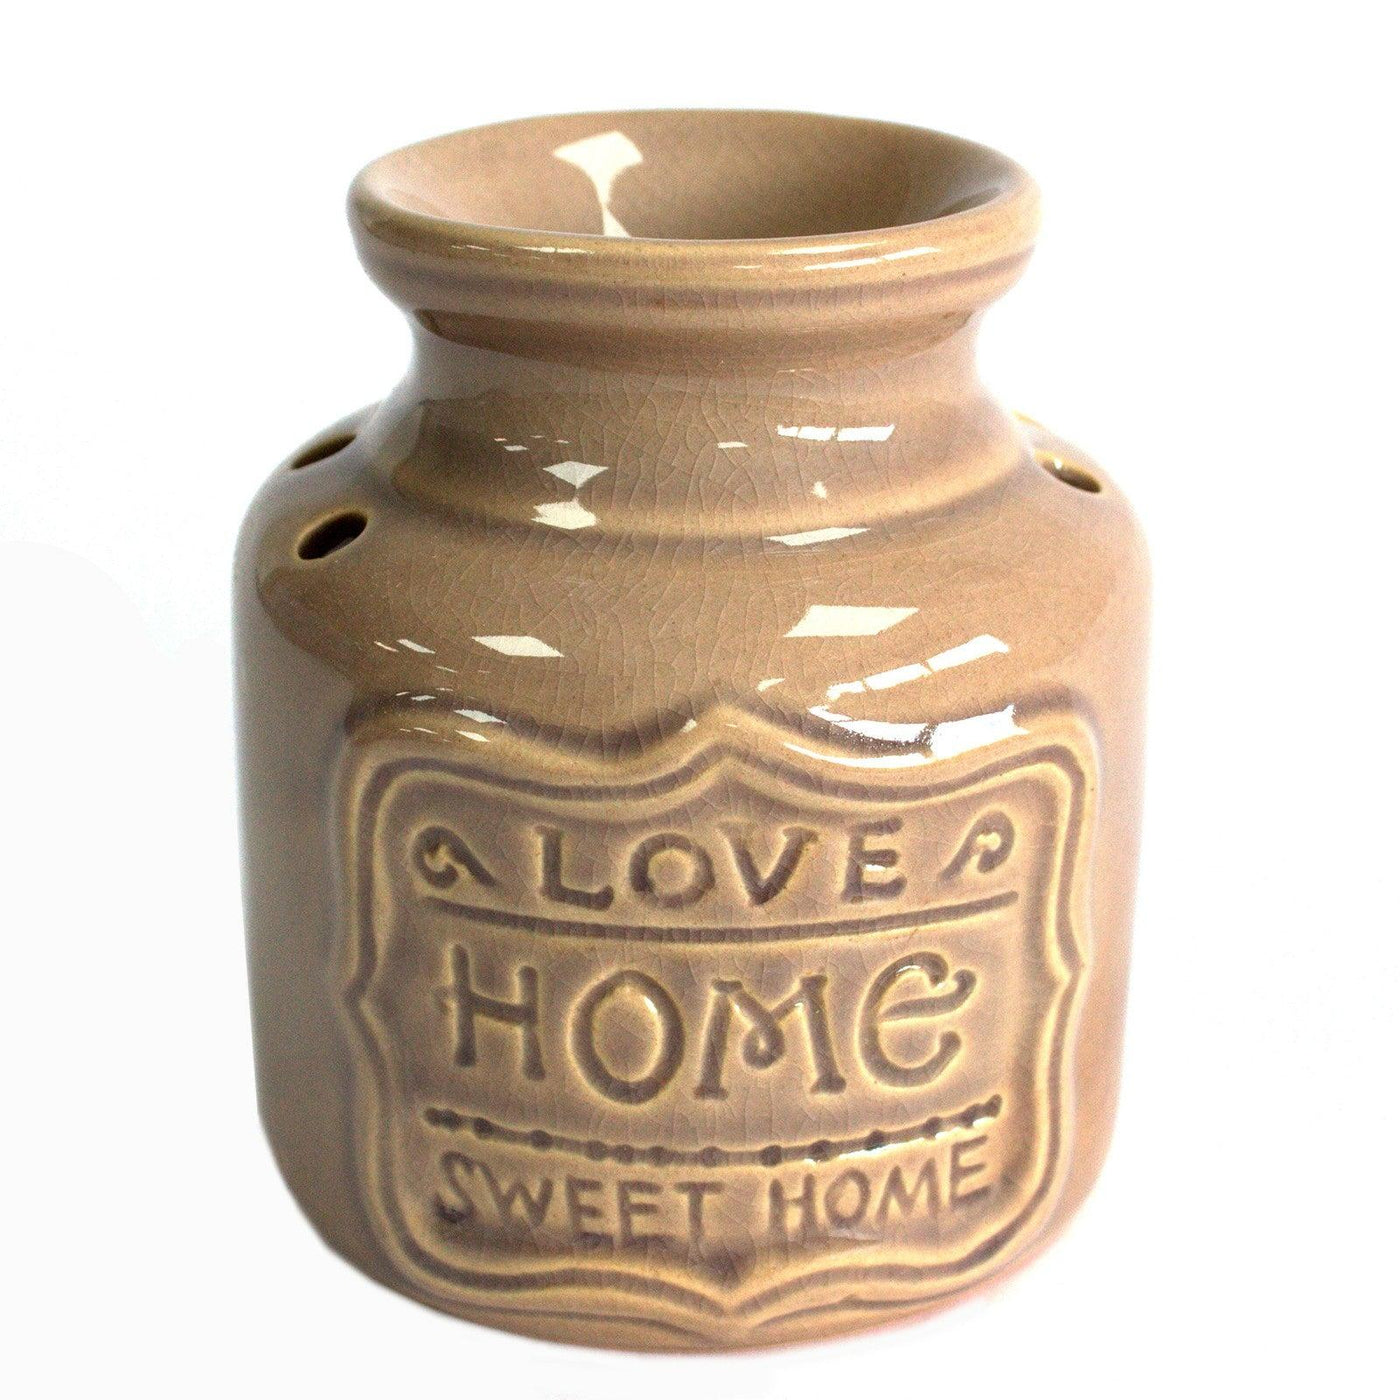 Grey Ceramic Vintage Country Oil And Wax Melts Burner - Love Home Sweet.